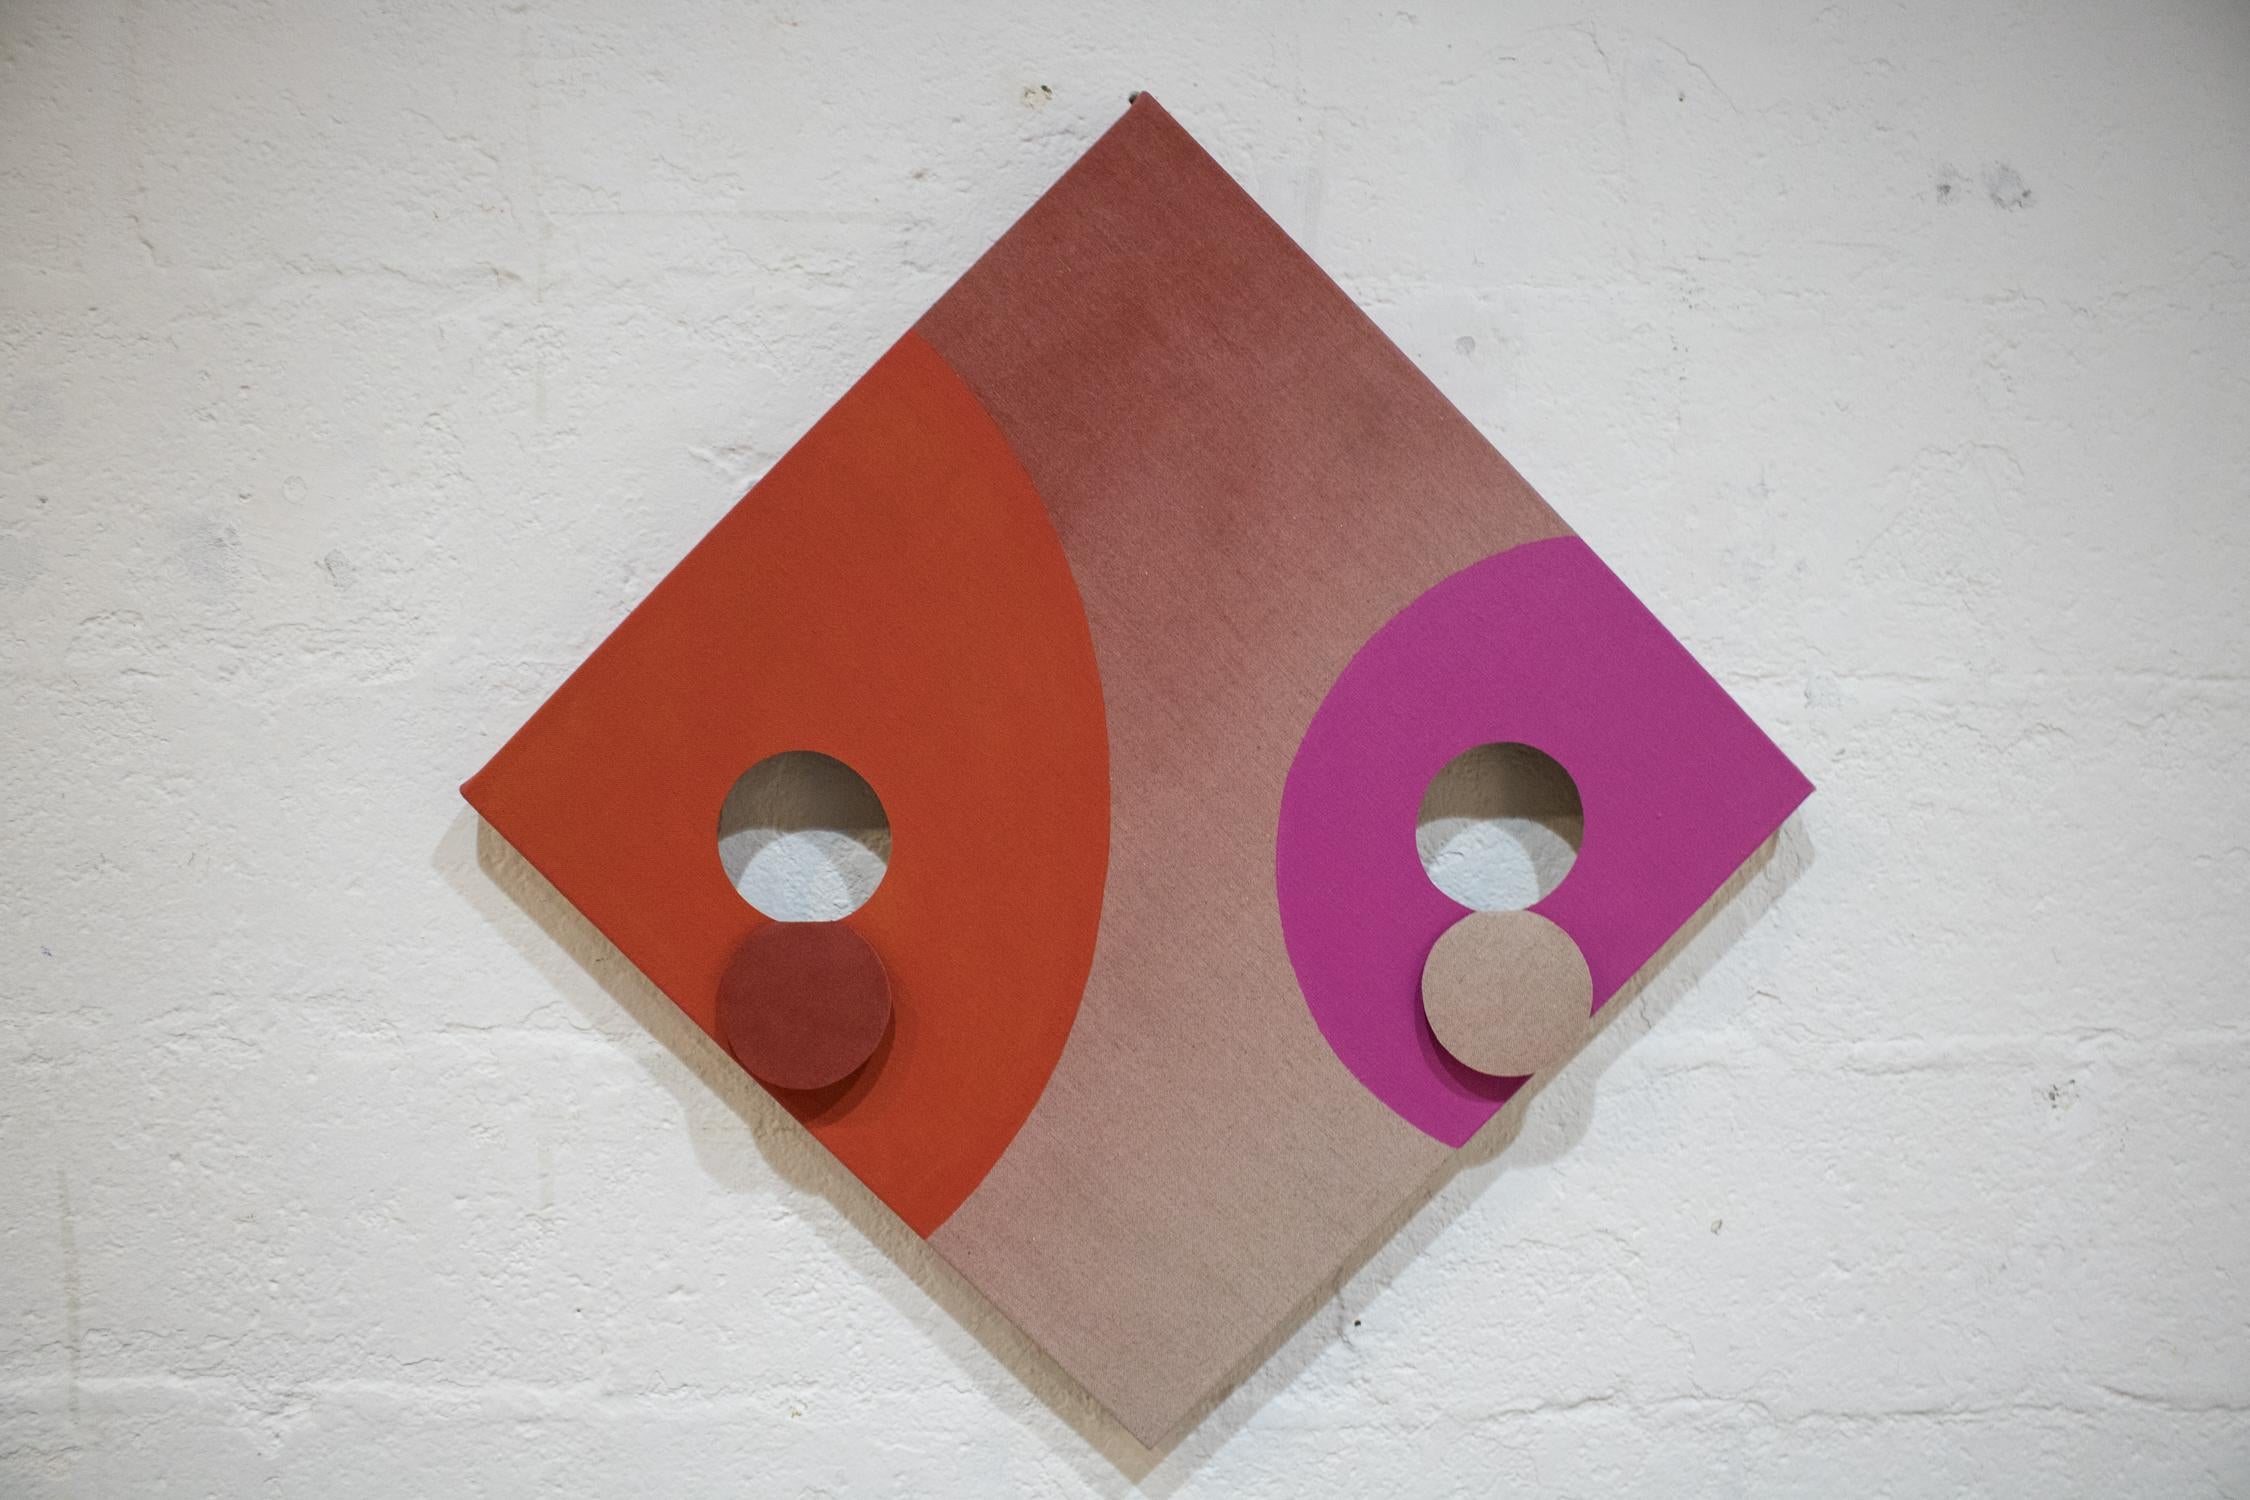 UNTITLED SCULPTURAL PAINTING -Abstract Oil & Acrylic on Linen, Pink, Orange, Tan For Sale 1